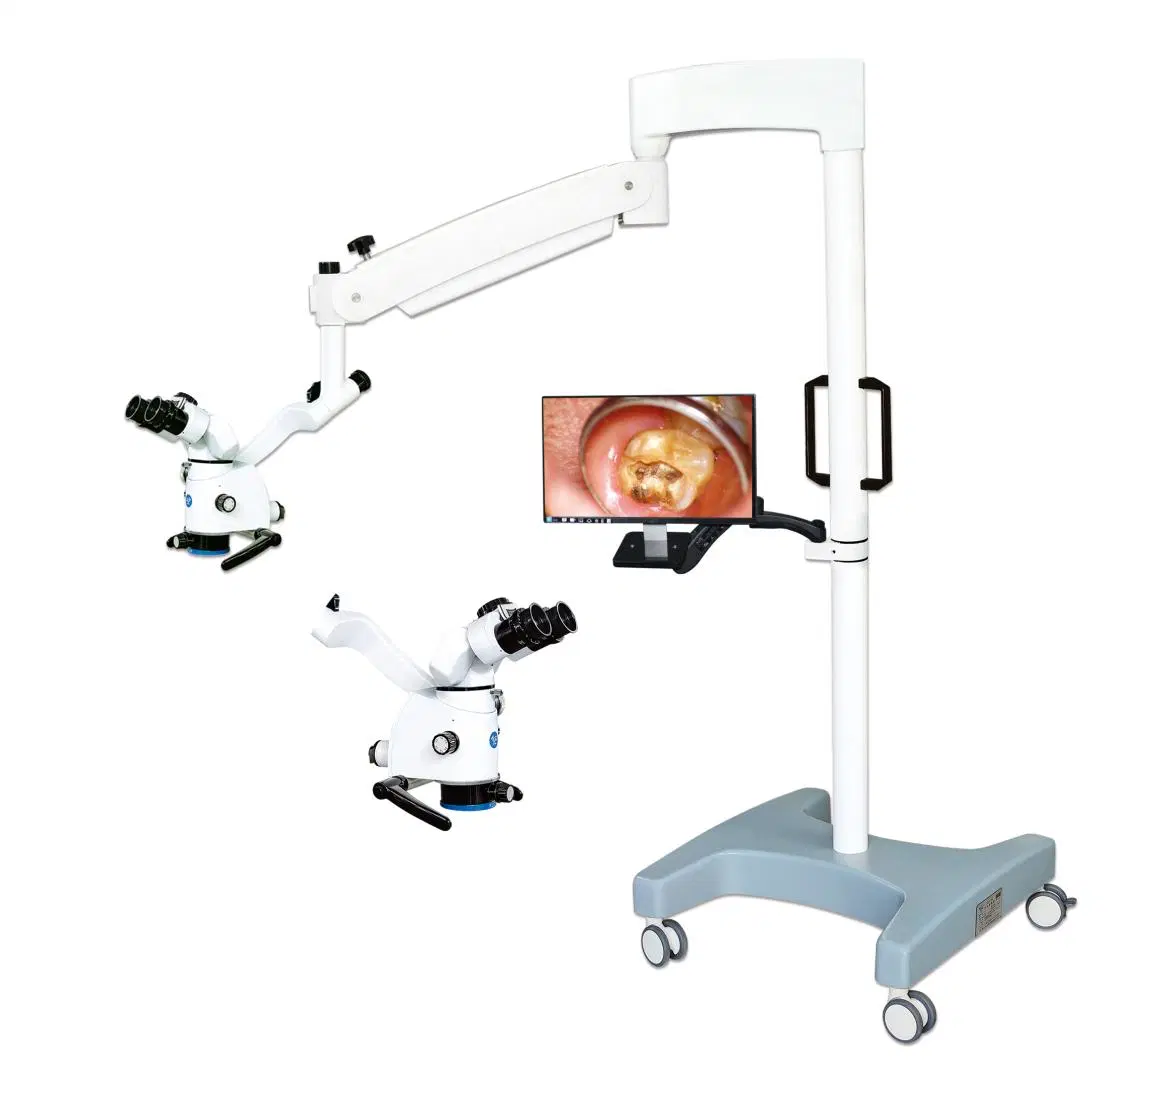 Binocular Ent Dental Operation Microscope with Stereoscopic Impression Optical System and LED Cold Light Mslsx14